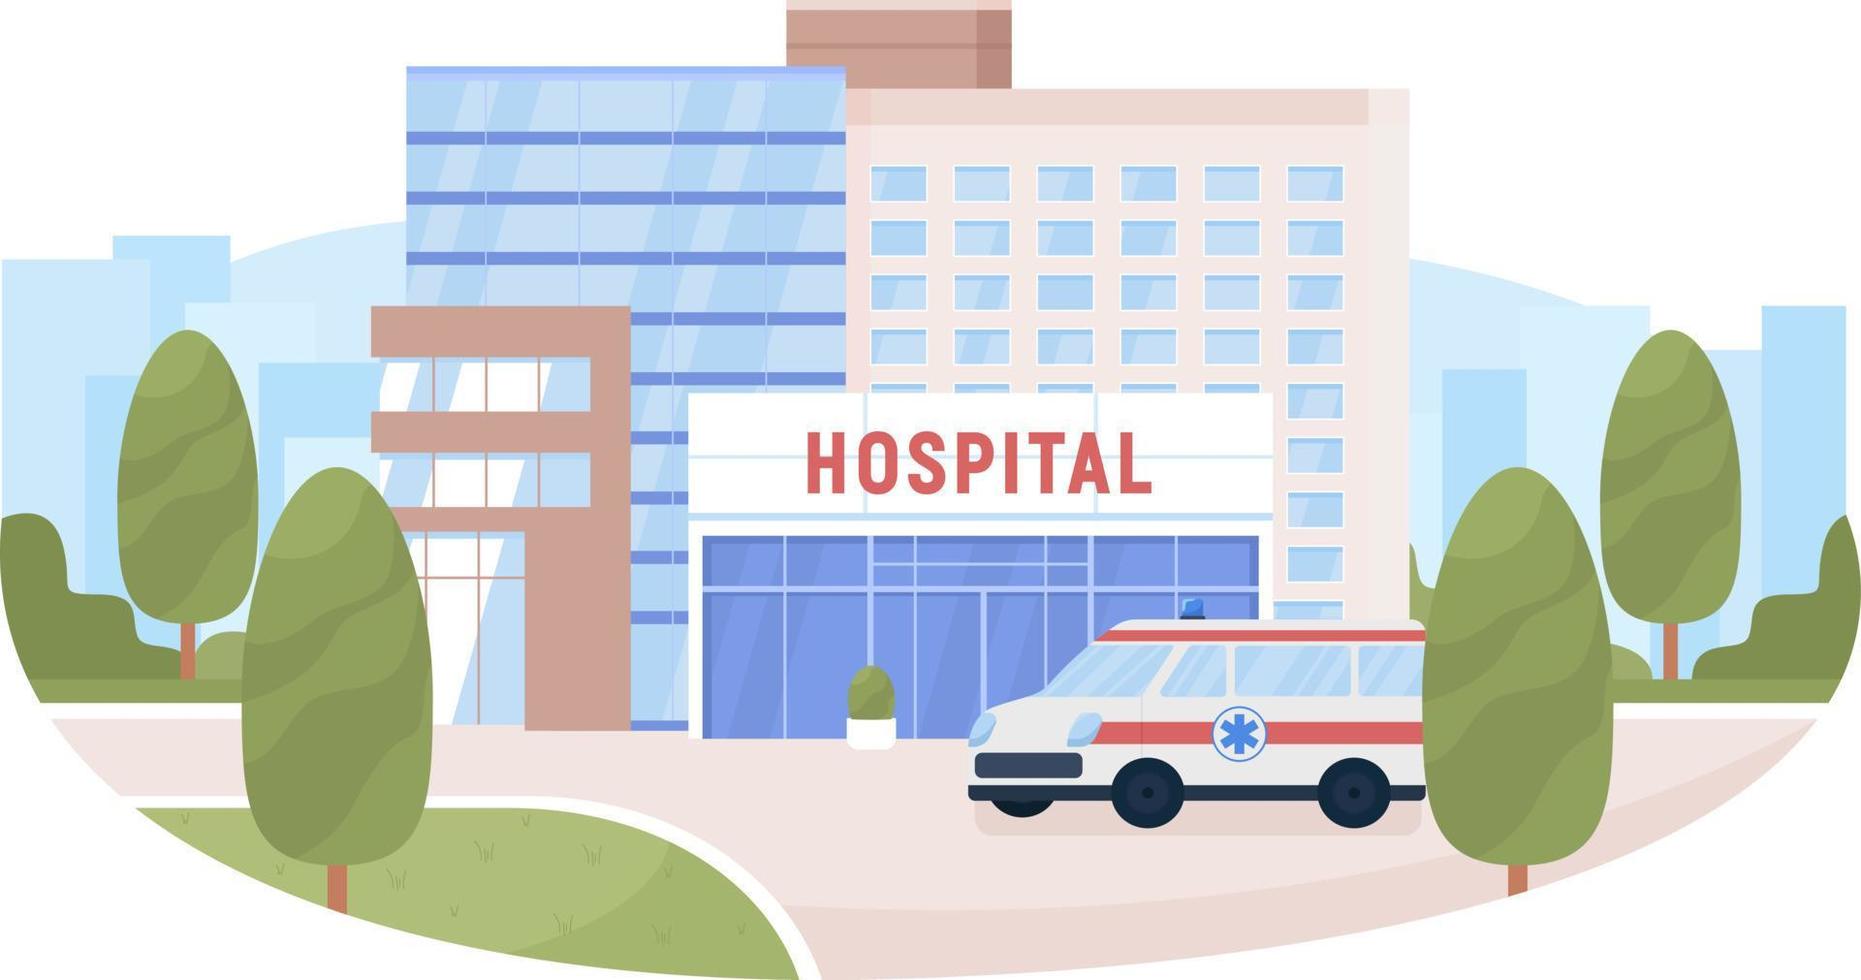 Hospital building and ambulance 2D vector isolated illustration